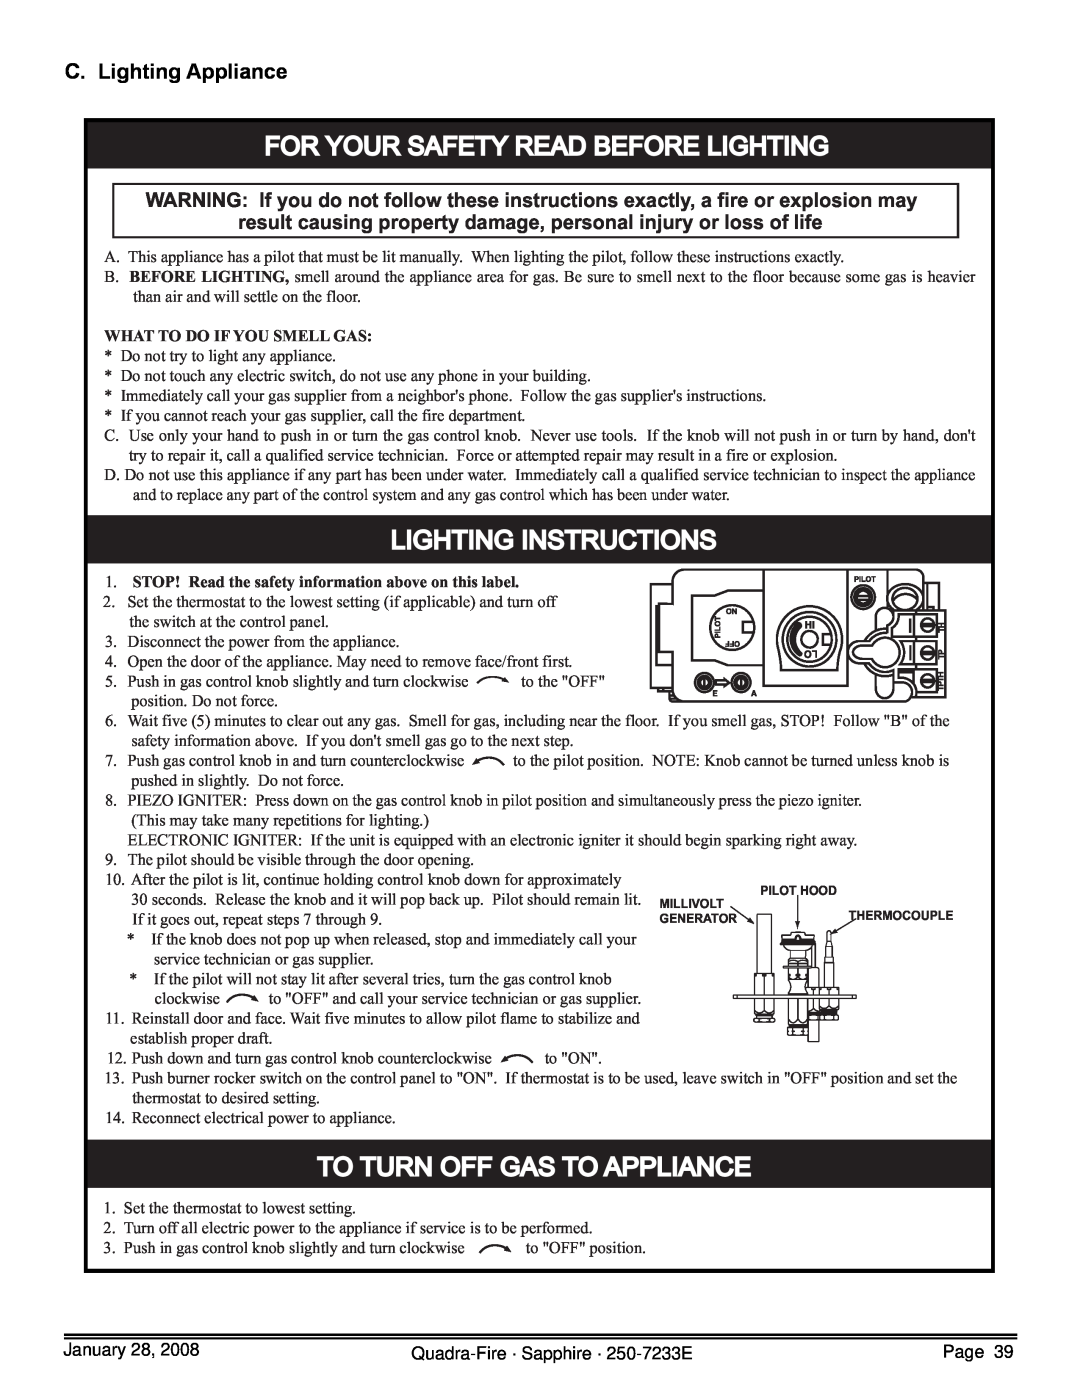 Quadra-Fire 839-1440, 839-1460, 839-1390 C. Lighting Appliance, For Your Safety Read Before Lighting, Lighting Instructions 